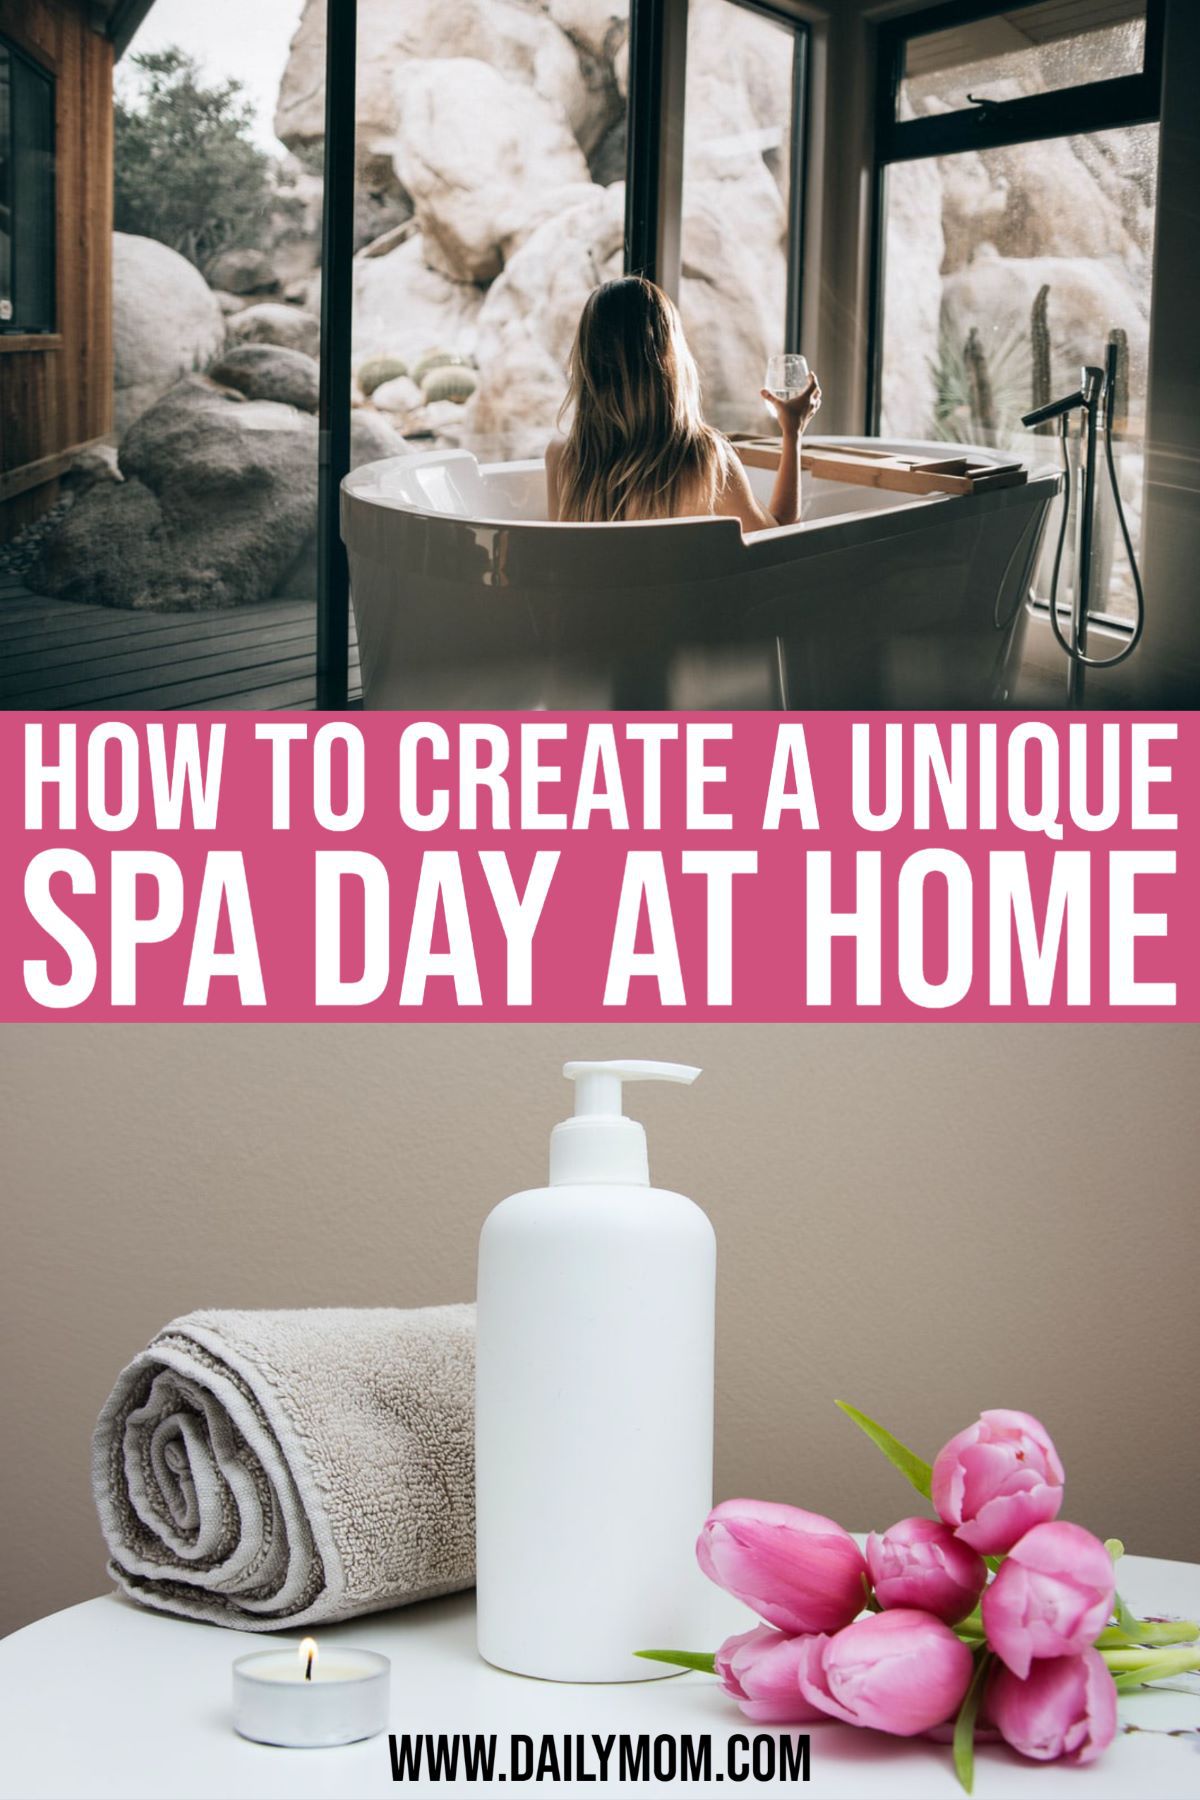 How To Create A Unique Spa Day At Home